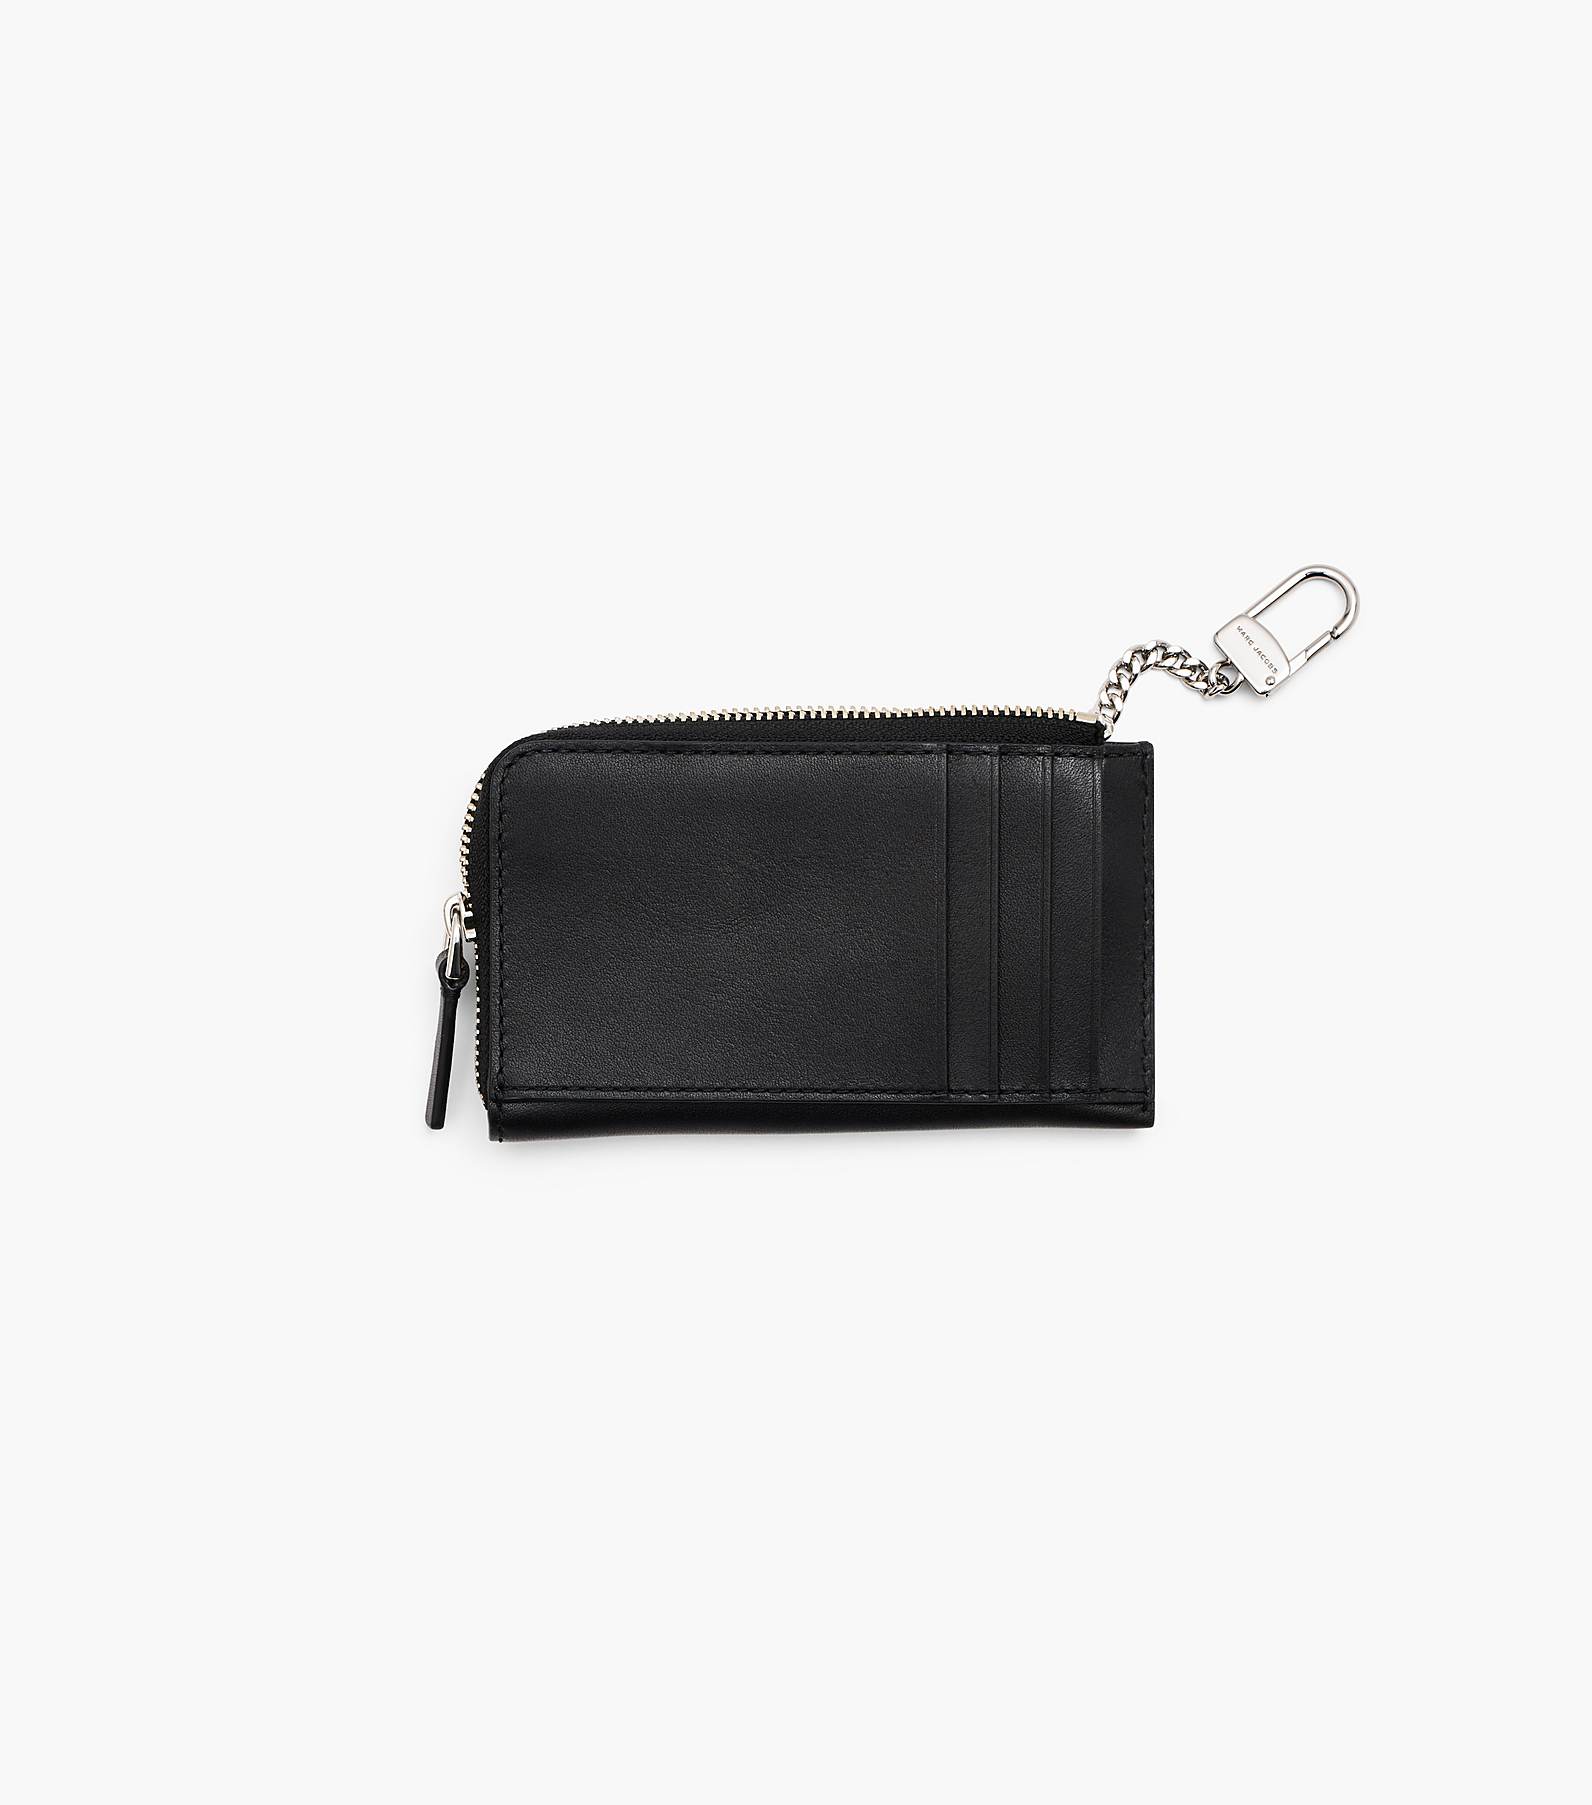 THE LEATHER COVERED J MARC TOP ZIP MULTI WALLET